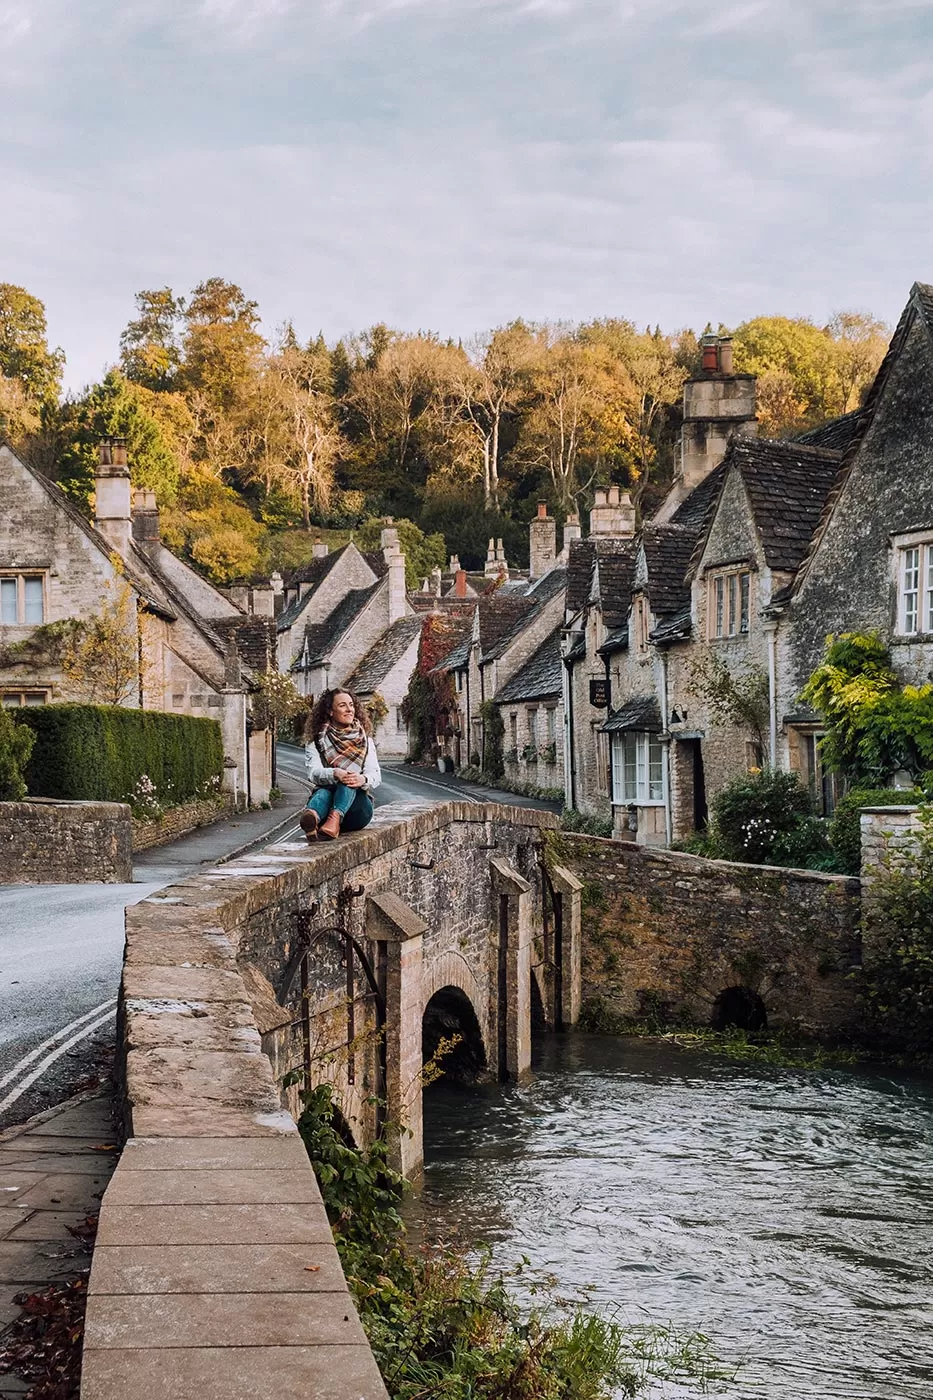 Cotswolds Best Villages - Castle Combe - Sitting on the bridge at Water Lane near weavers cottages